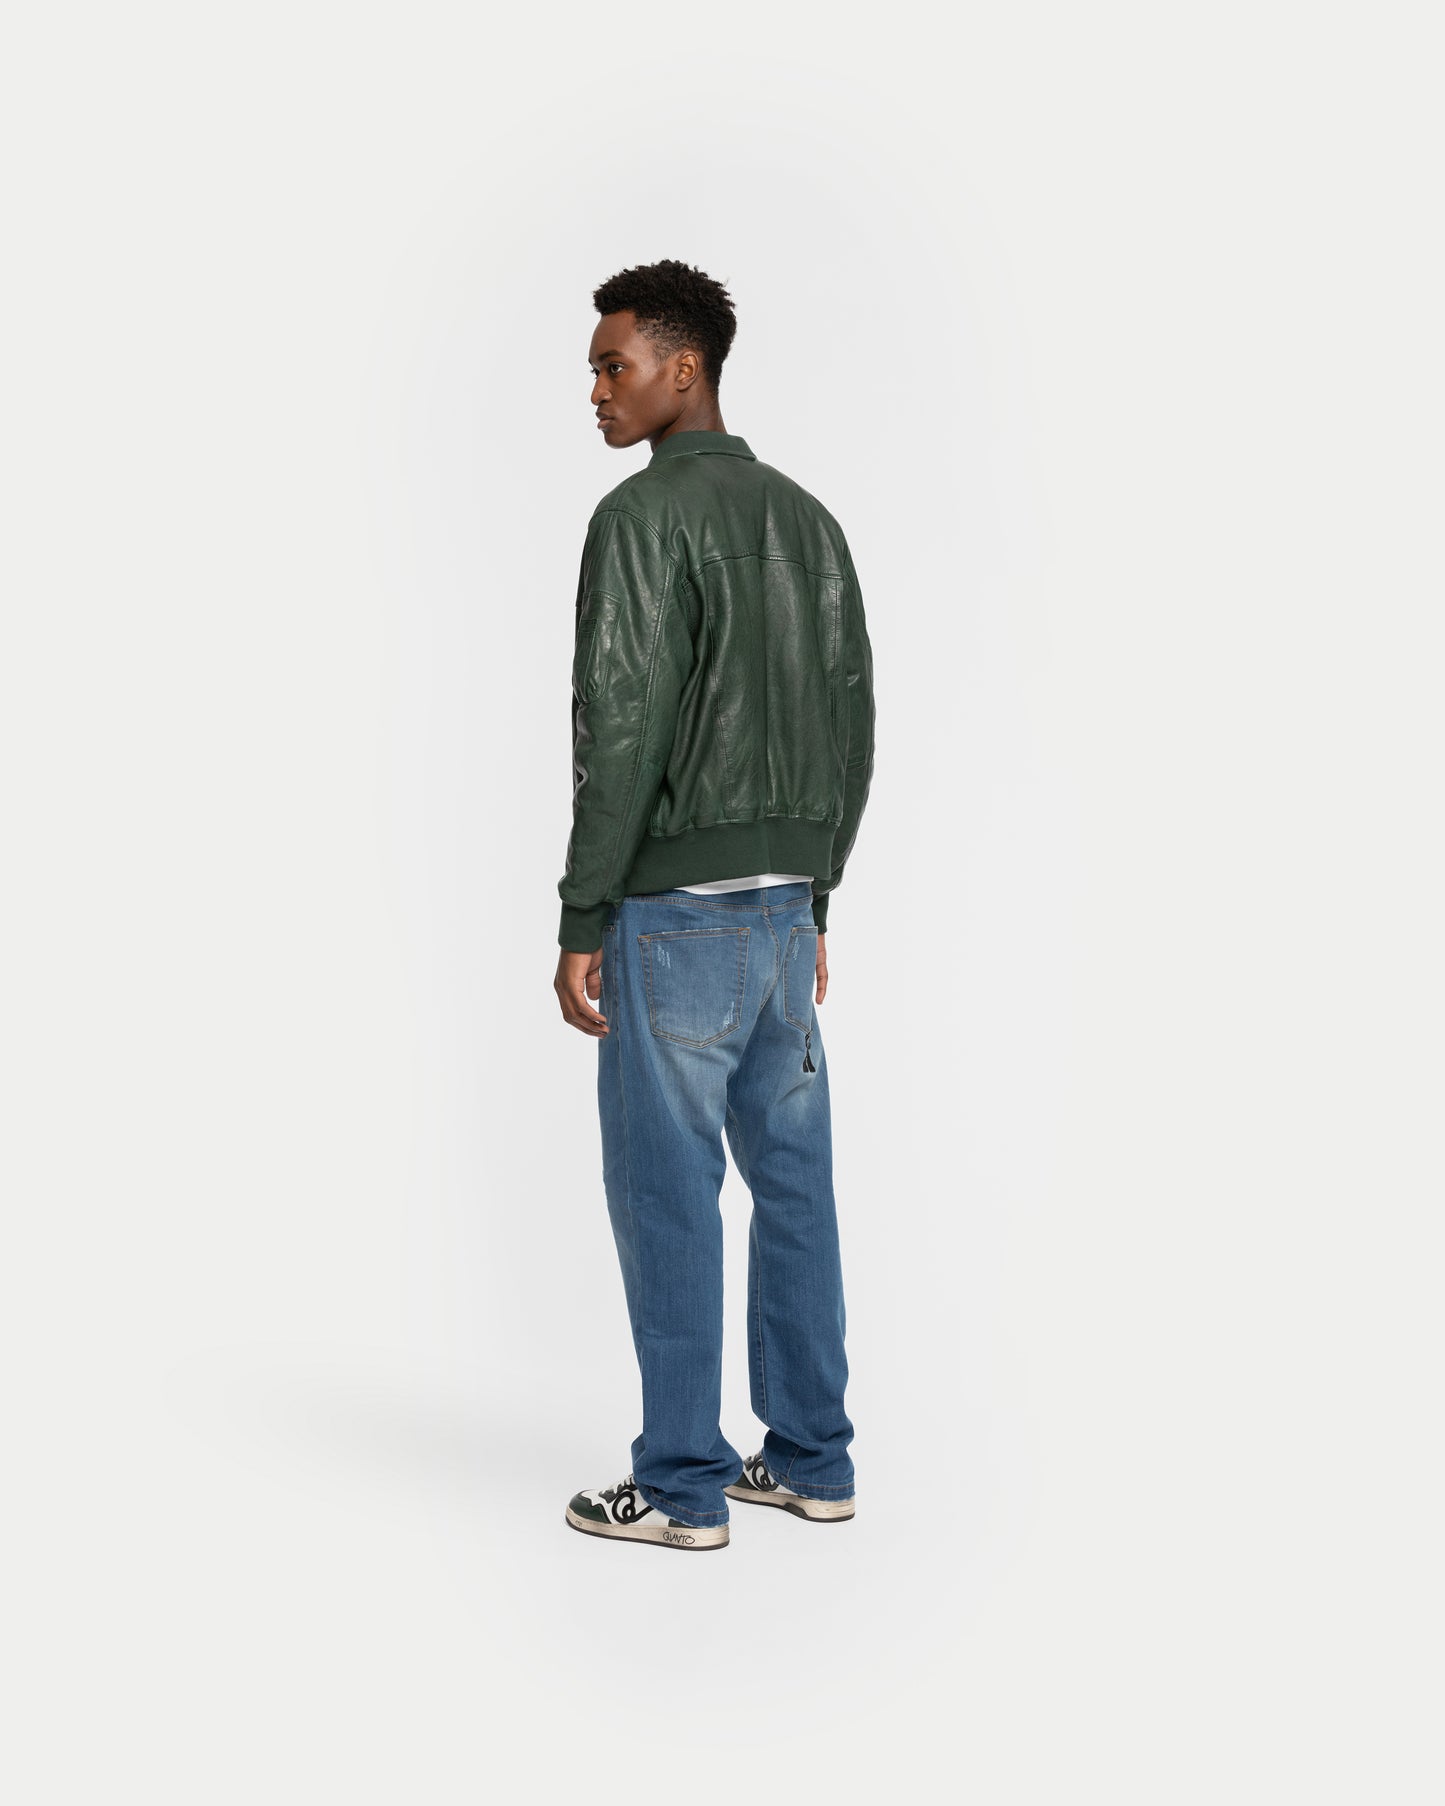 GREEN LEATHER JACKET